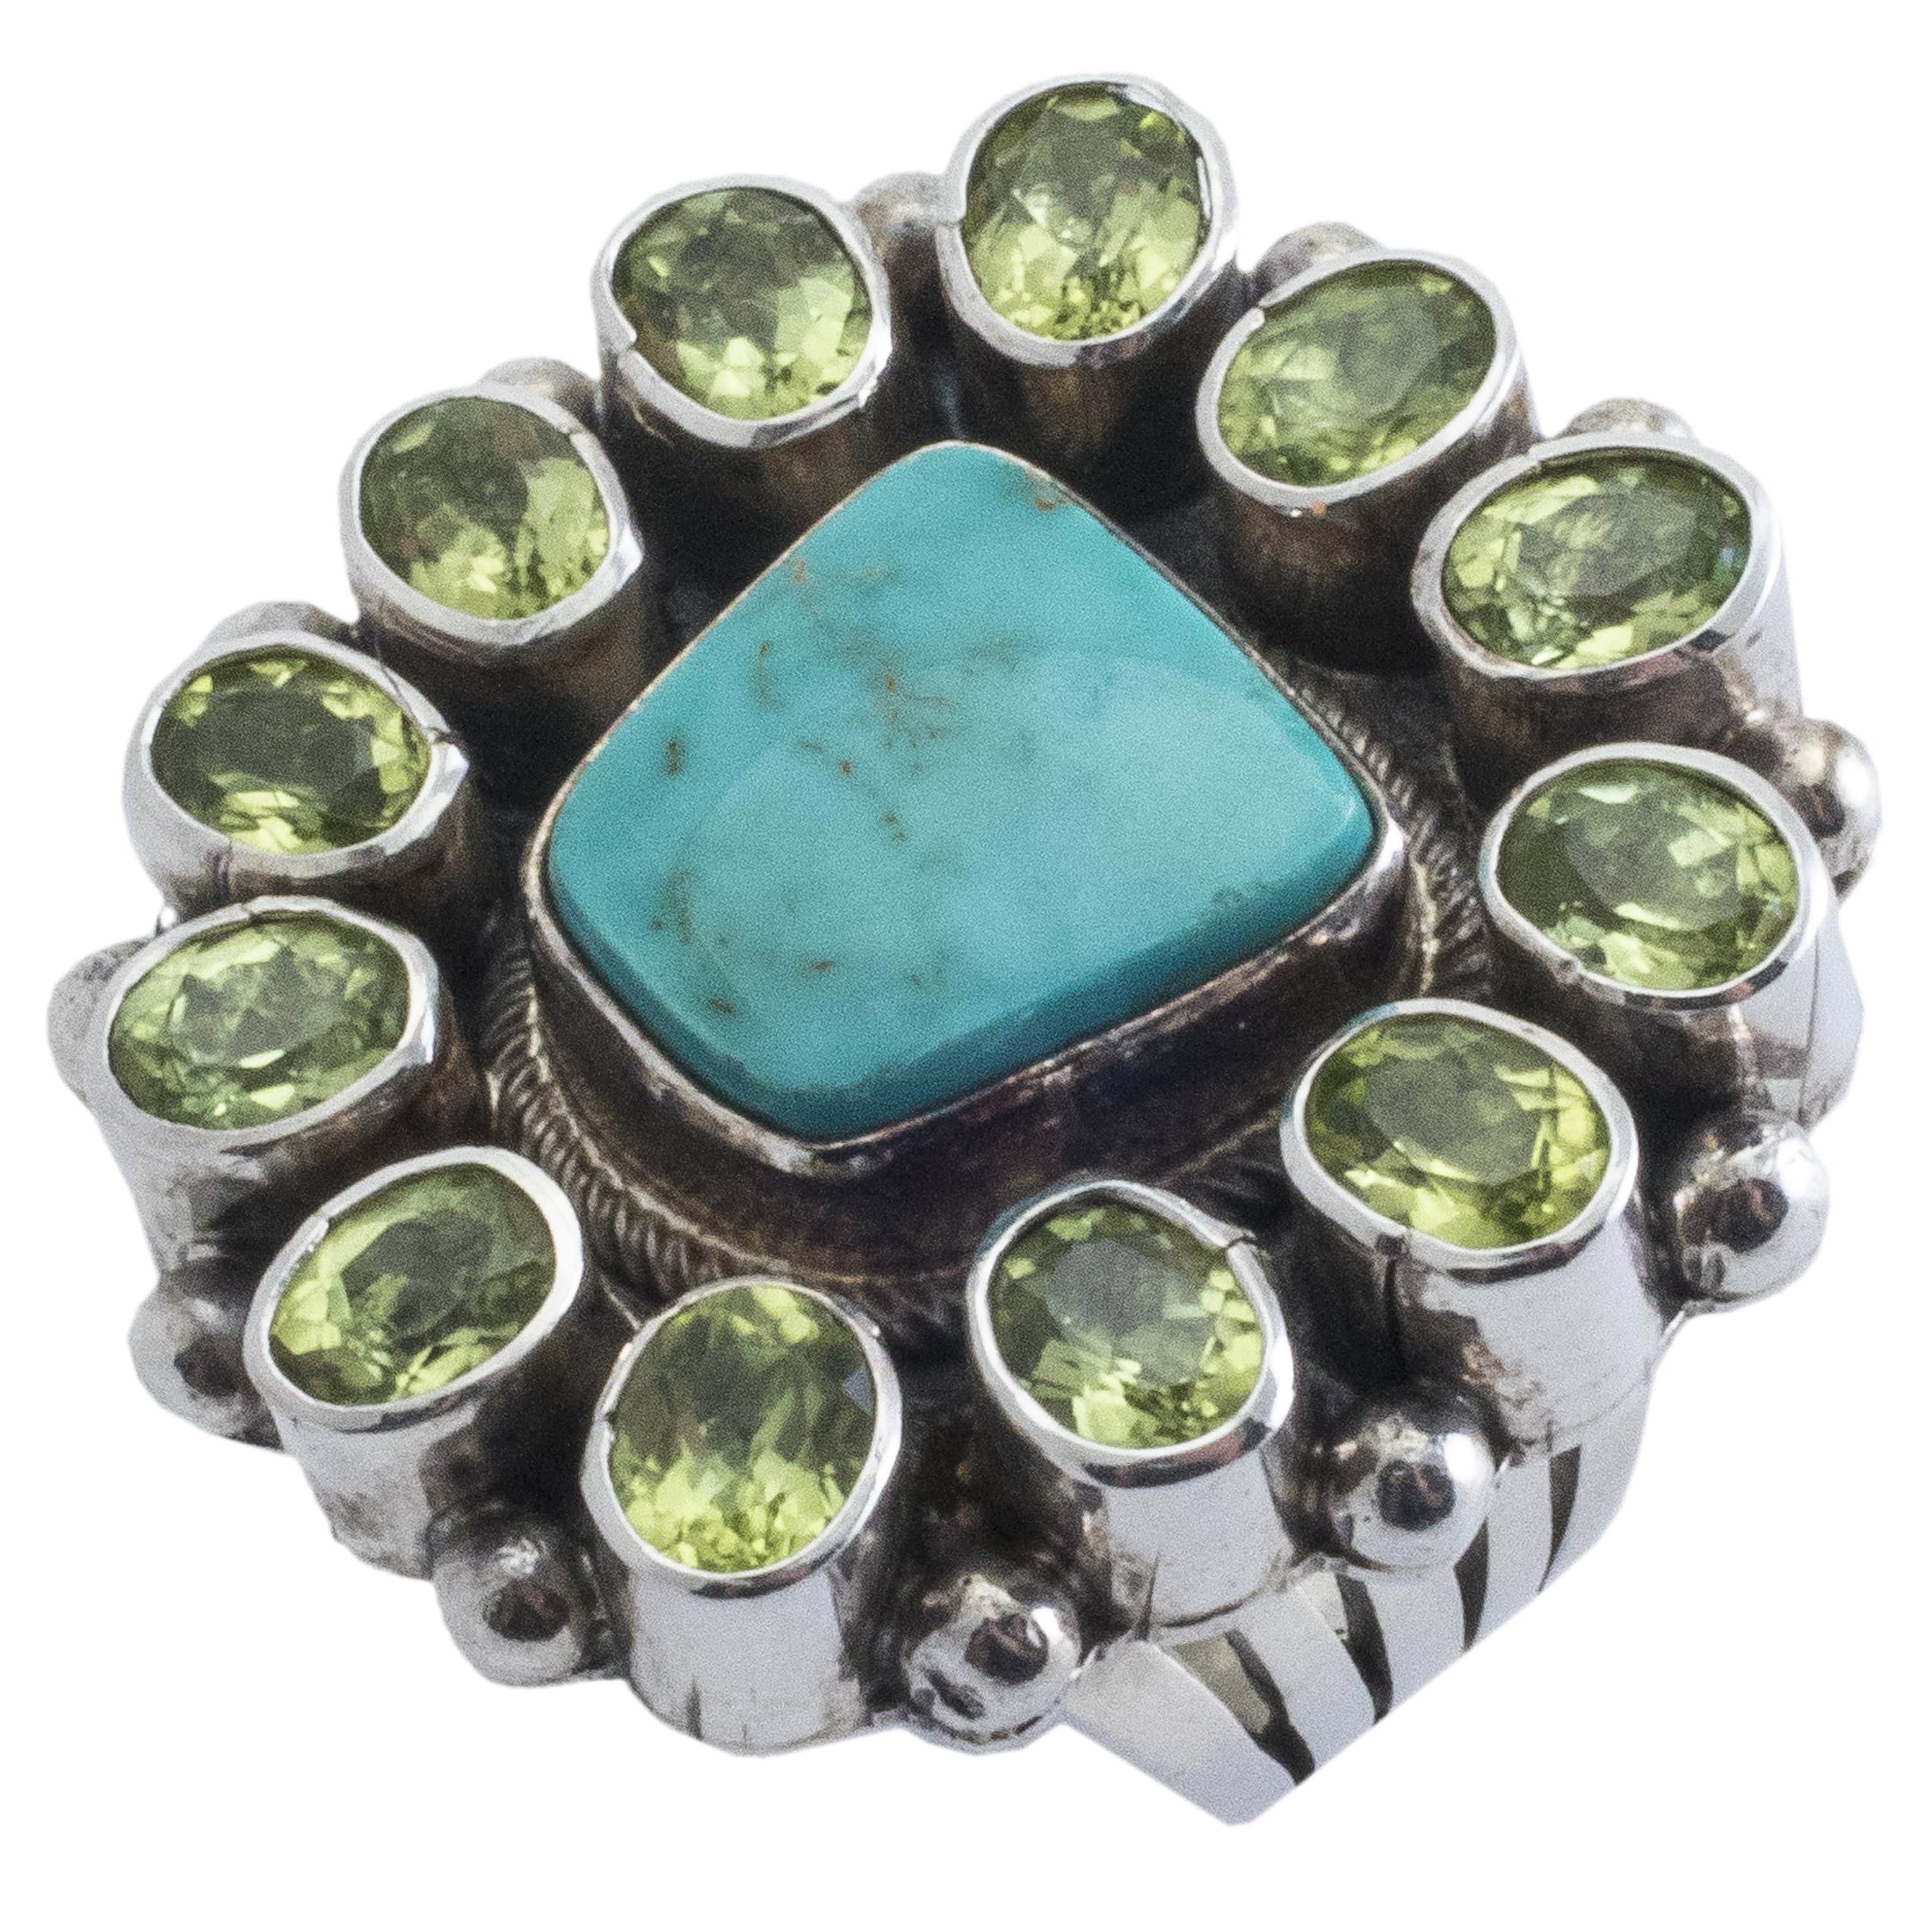 Kalifano Native American Jewelry 6 Paul Livingston Peridot with Kingman Turquoise Center USA Native American Made 925 Sterling Silver Ring NAR1600.001.6